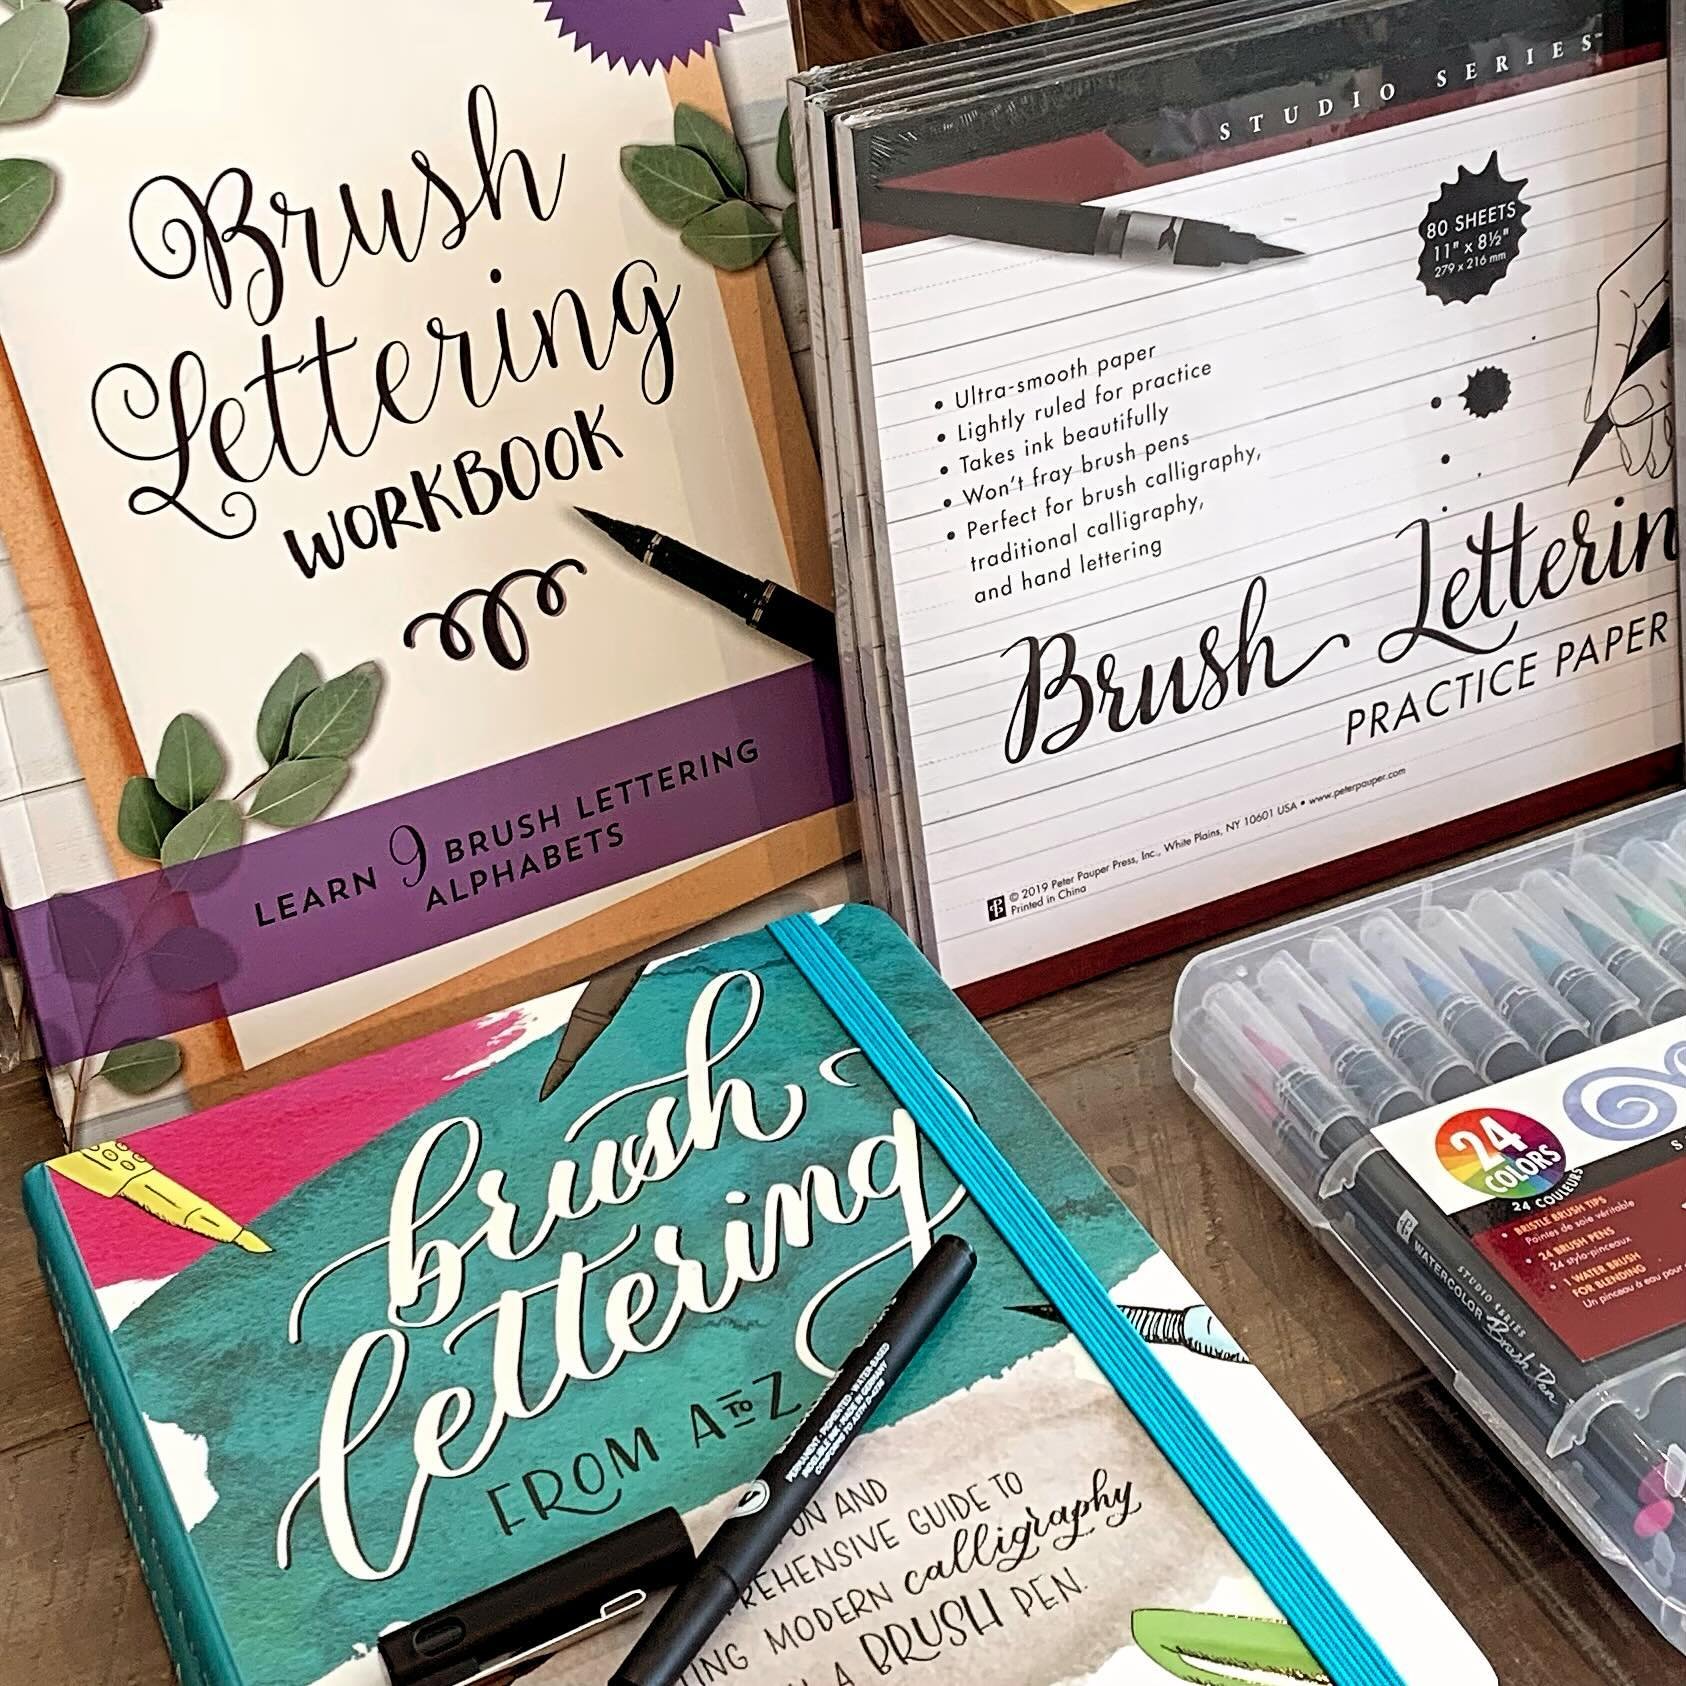 If you&rsquo;re interested in learning Brush Lettering, we have beautiful instructional books, practice pads &amp; brush pens! Handwriting is not a lost art, it just requires a little practice ✍🏼